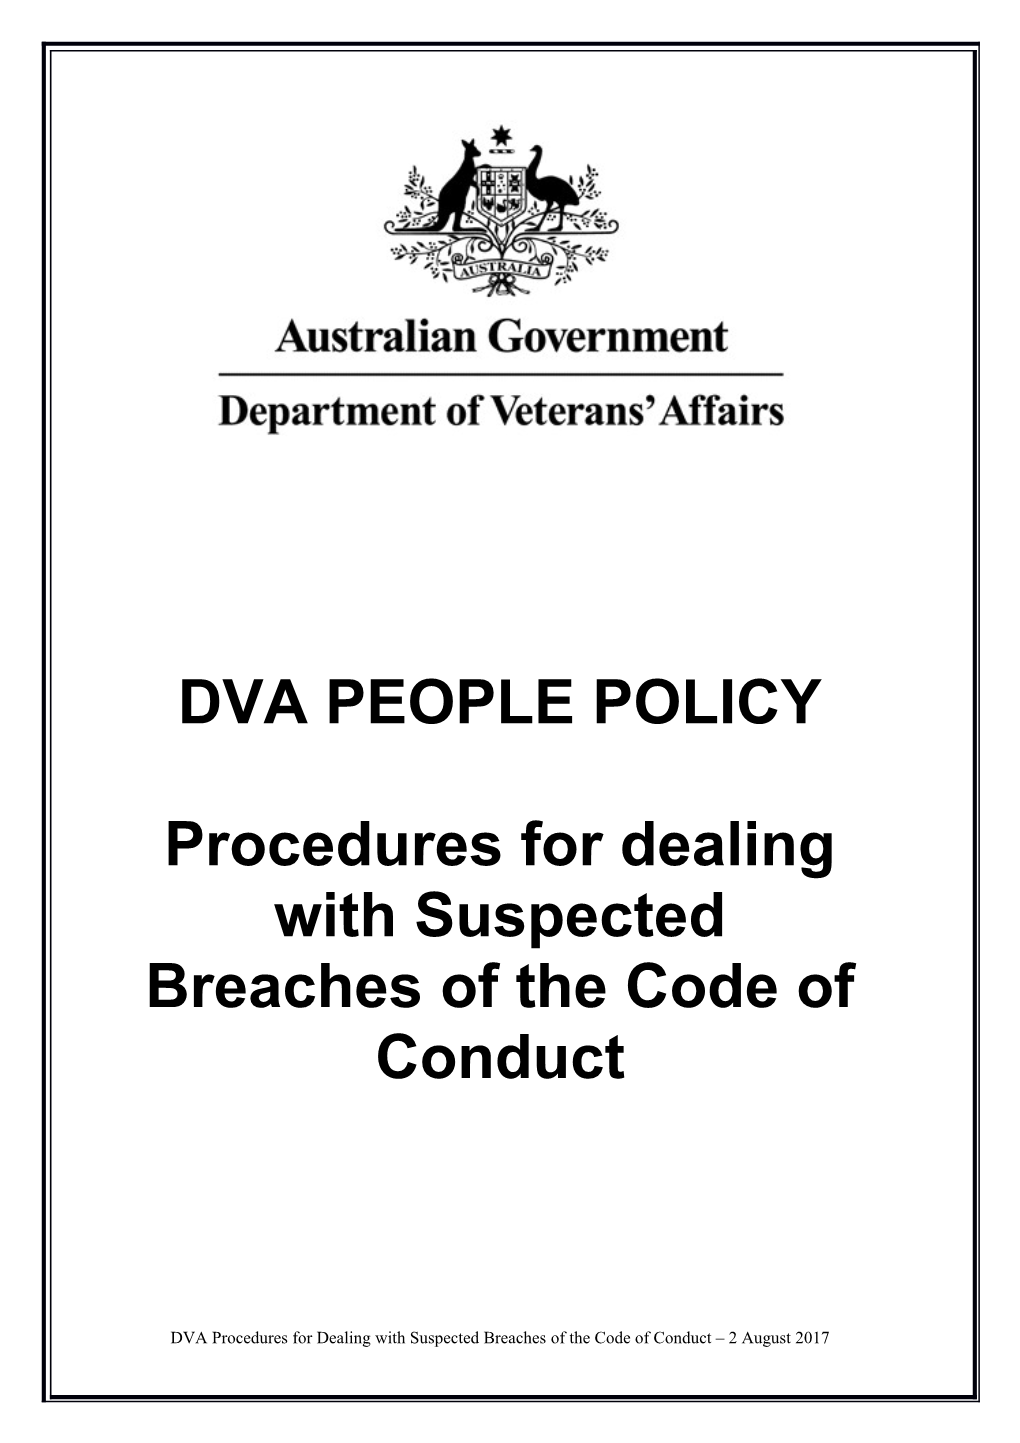 Procedures for Dealing with Suspected Breaches of the Code of Conduct